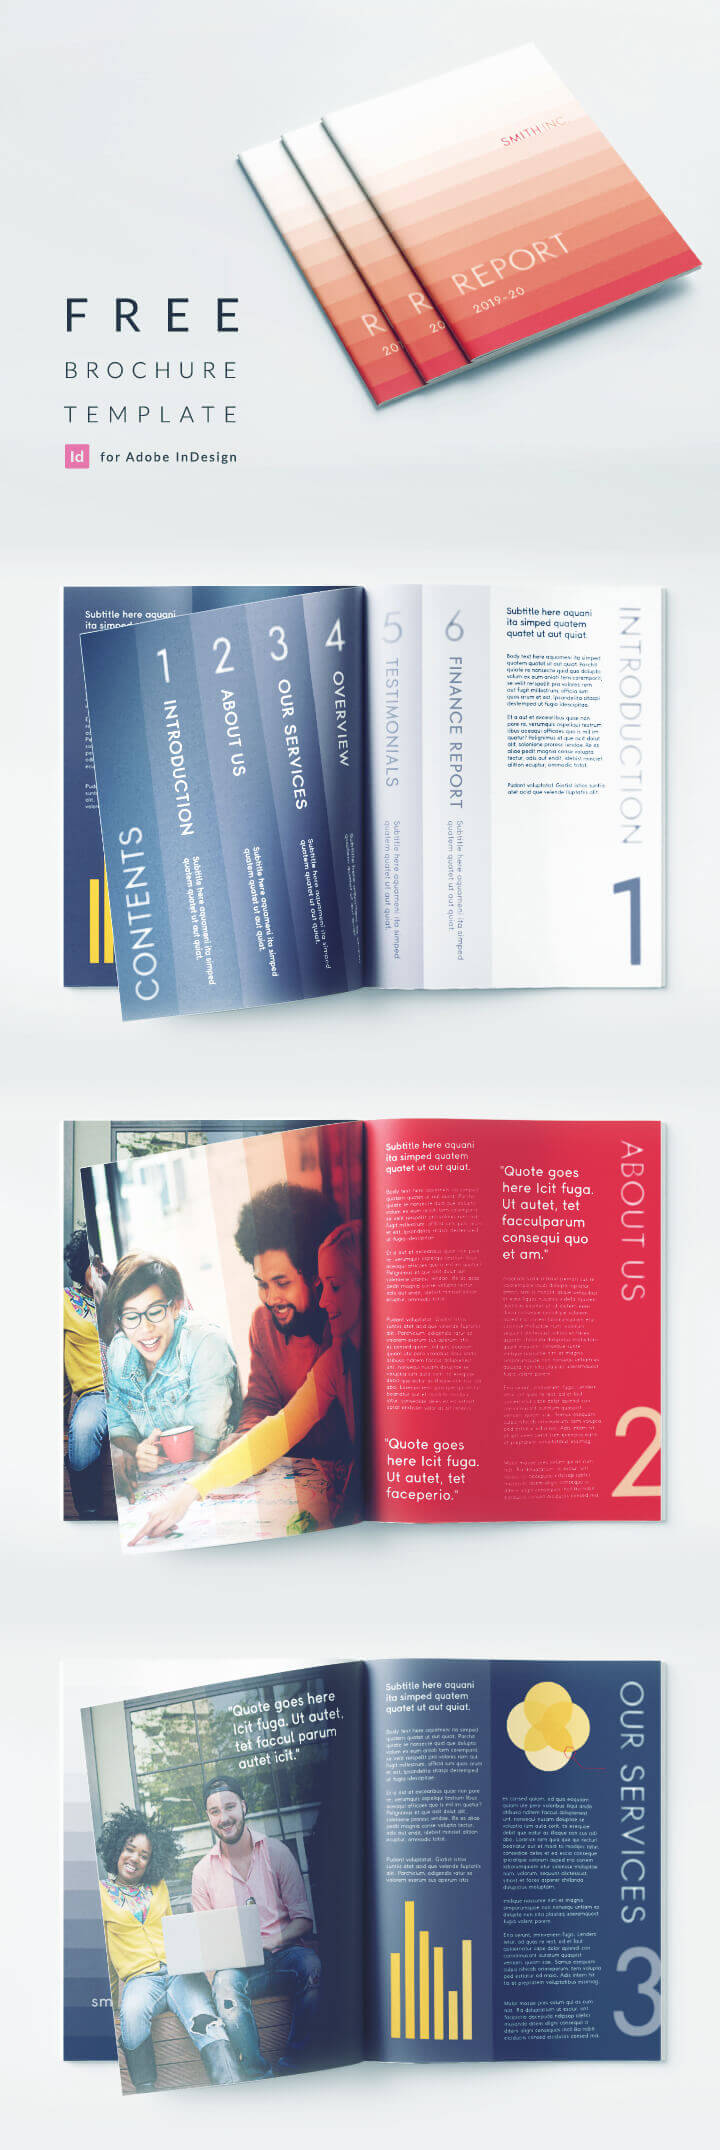 Elegant Corporate Brochure Or Report Indesign Template With Indesign Templates Free Download Brochure